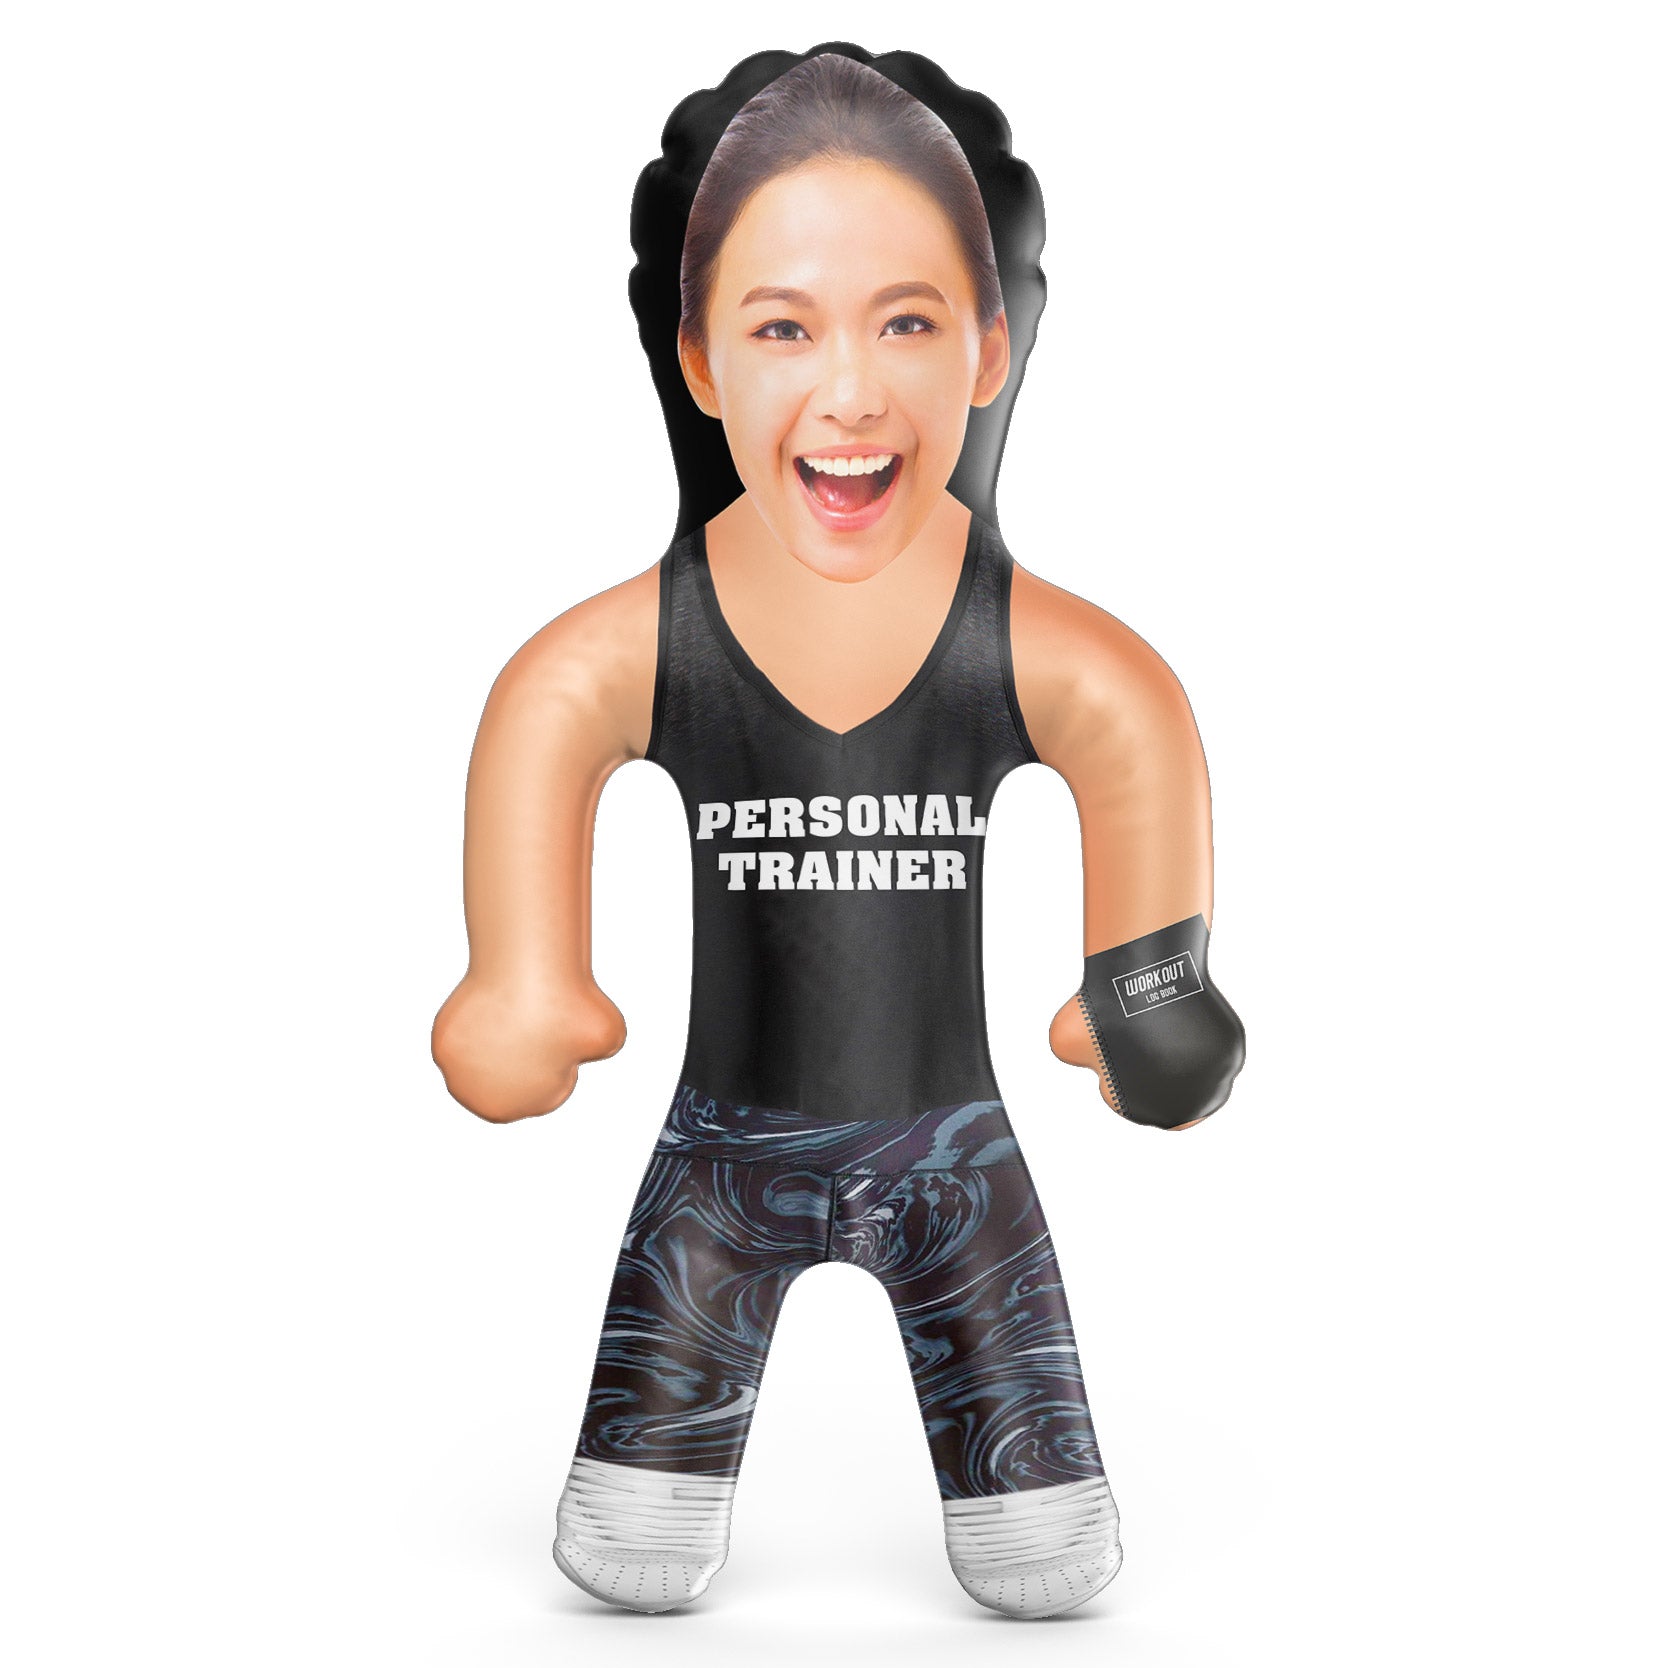 Personal Trainer Female Inflatable Doll - Blow Up Doll